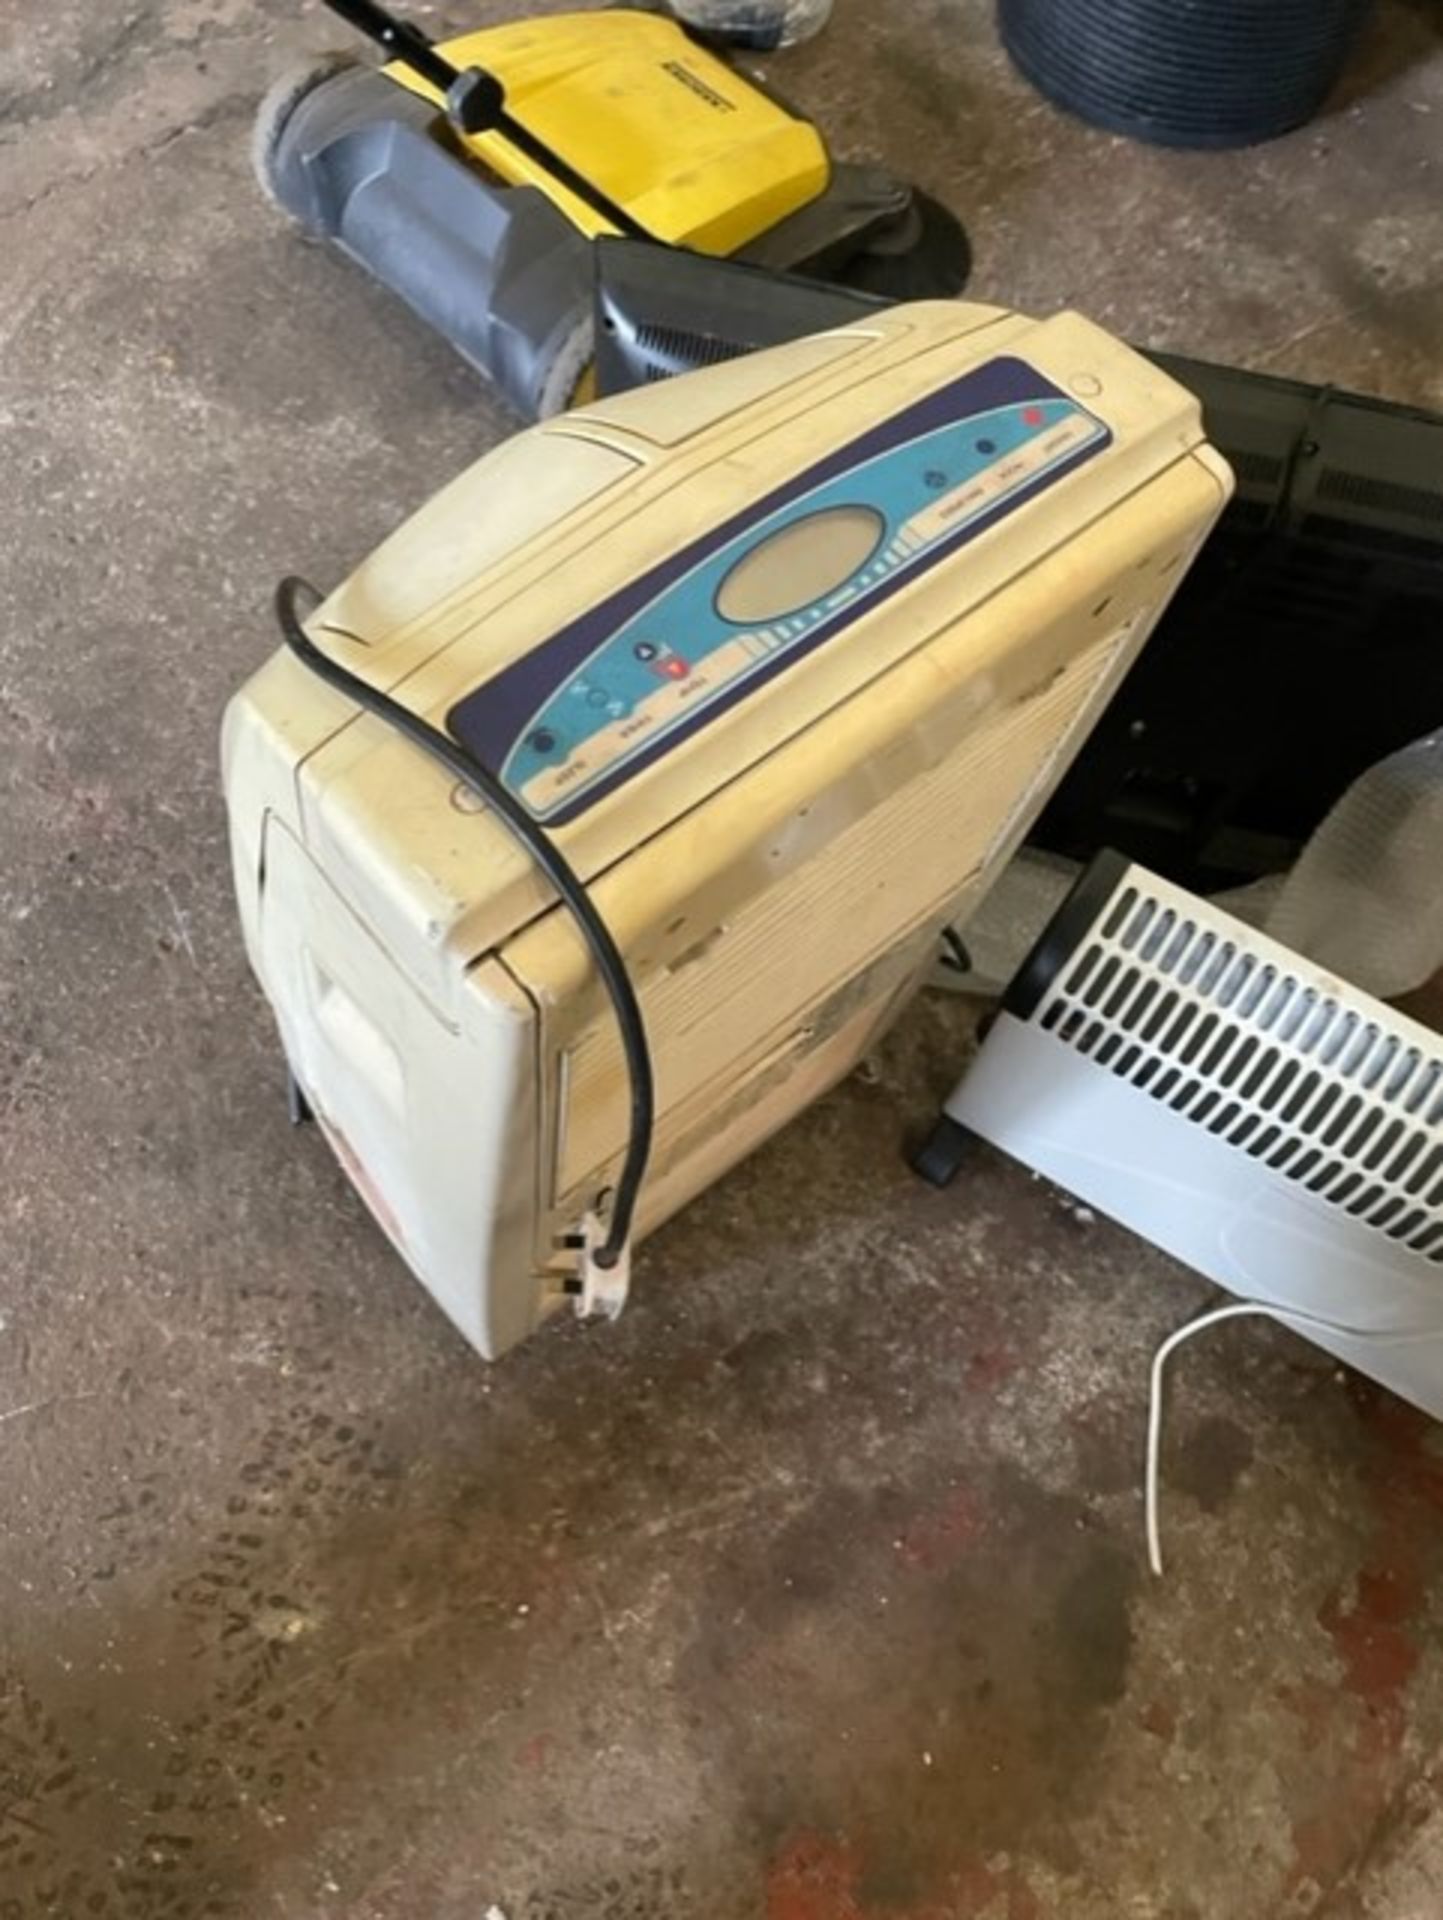 Air conditioning unit it works but has panel missing in the bottom and it has 2 of the 4 wheels - Image 2 of 3